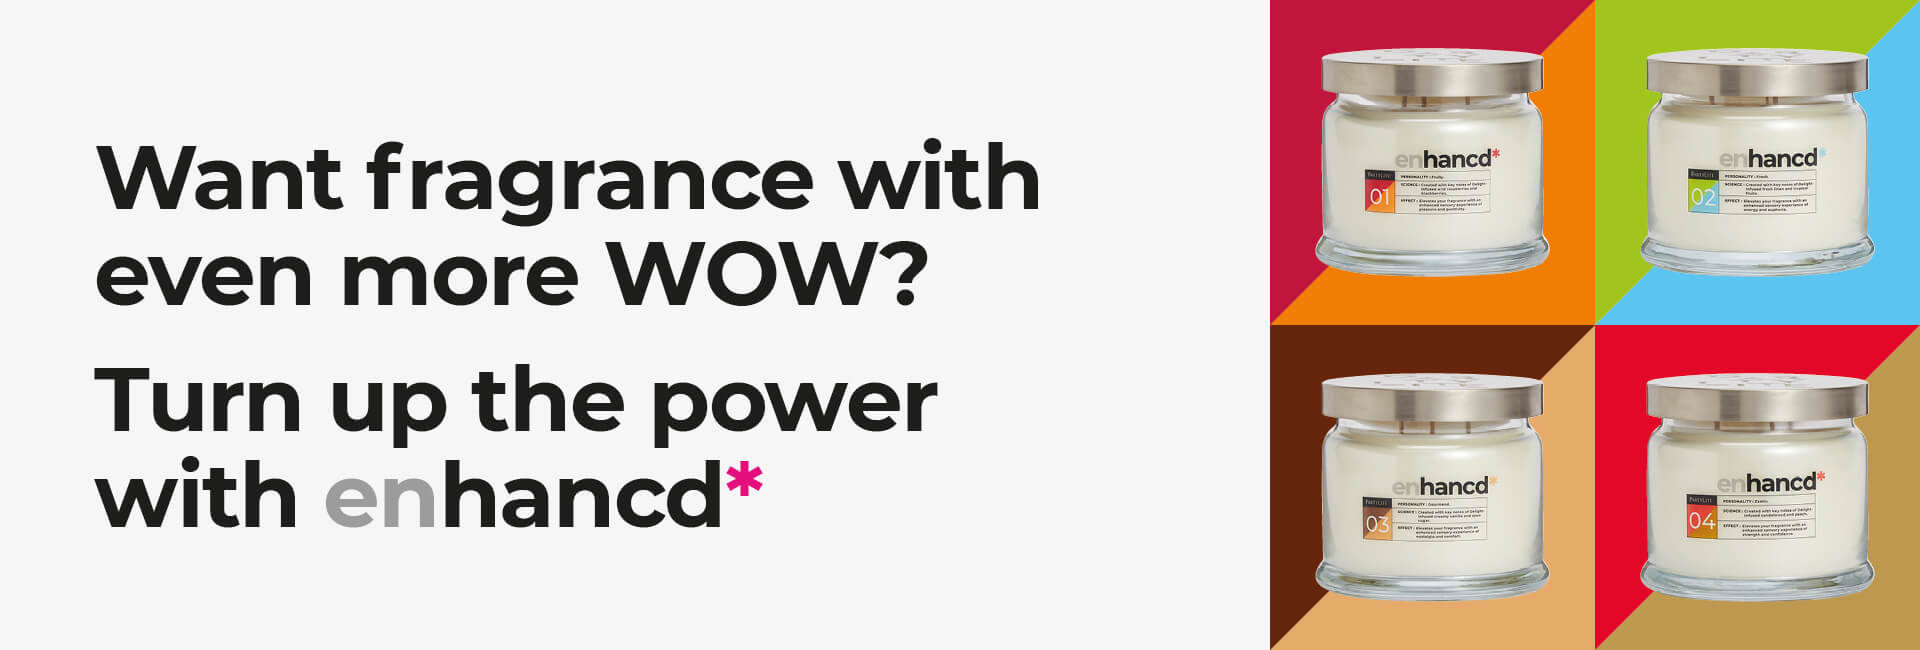 Want fragrance with even more WOW? Turn up the power with enhancd*